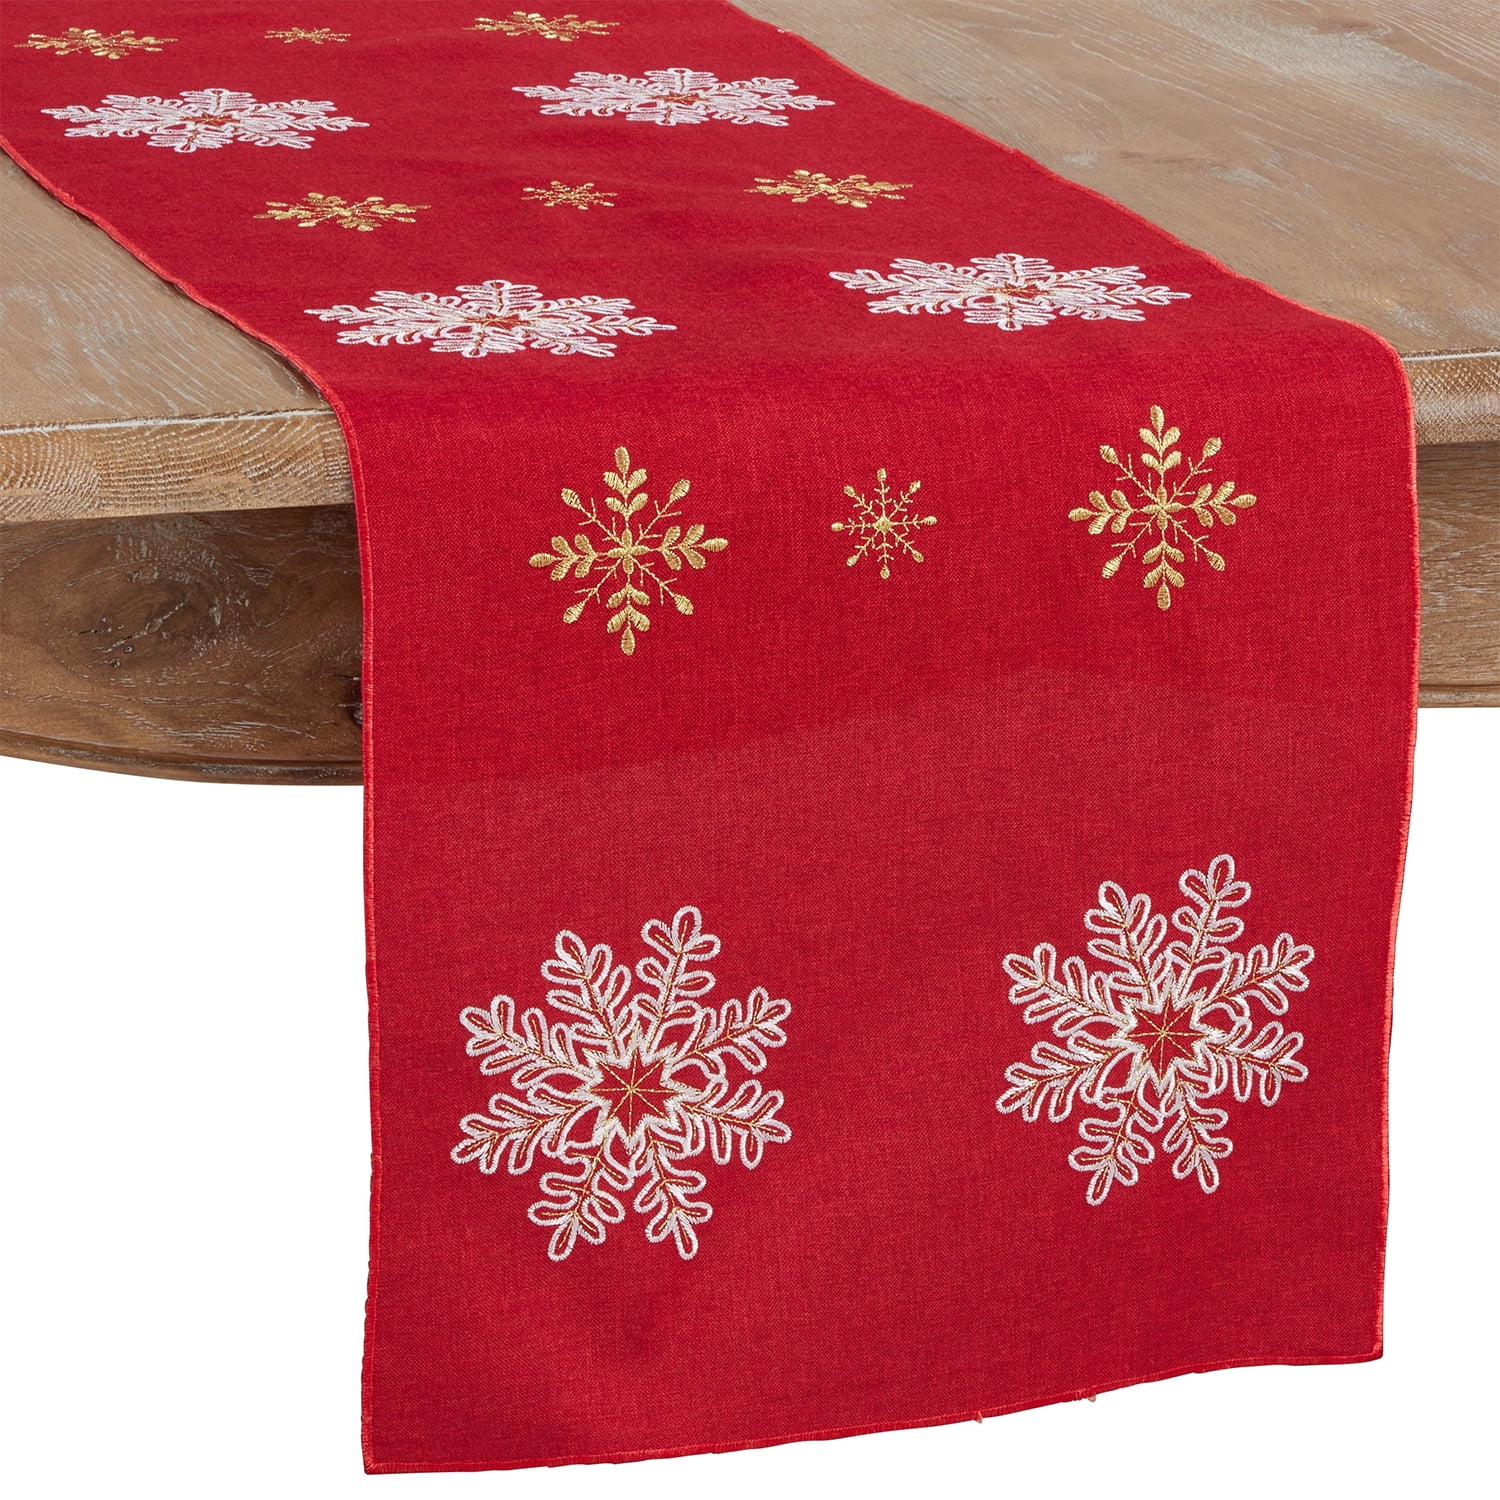 ALAZA Christmas Reindeer and Snowflakes Red Table Runner Cover for Family Dinner,Wedding Christmas Party Holiday Decor,Farmhouse,13 x90 Inches,Machine Washable 